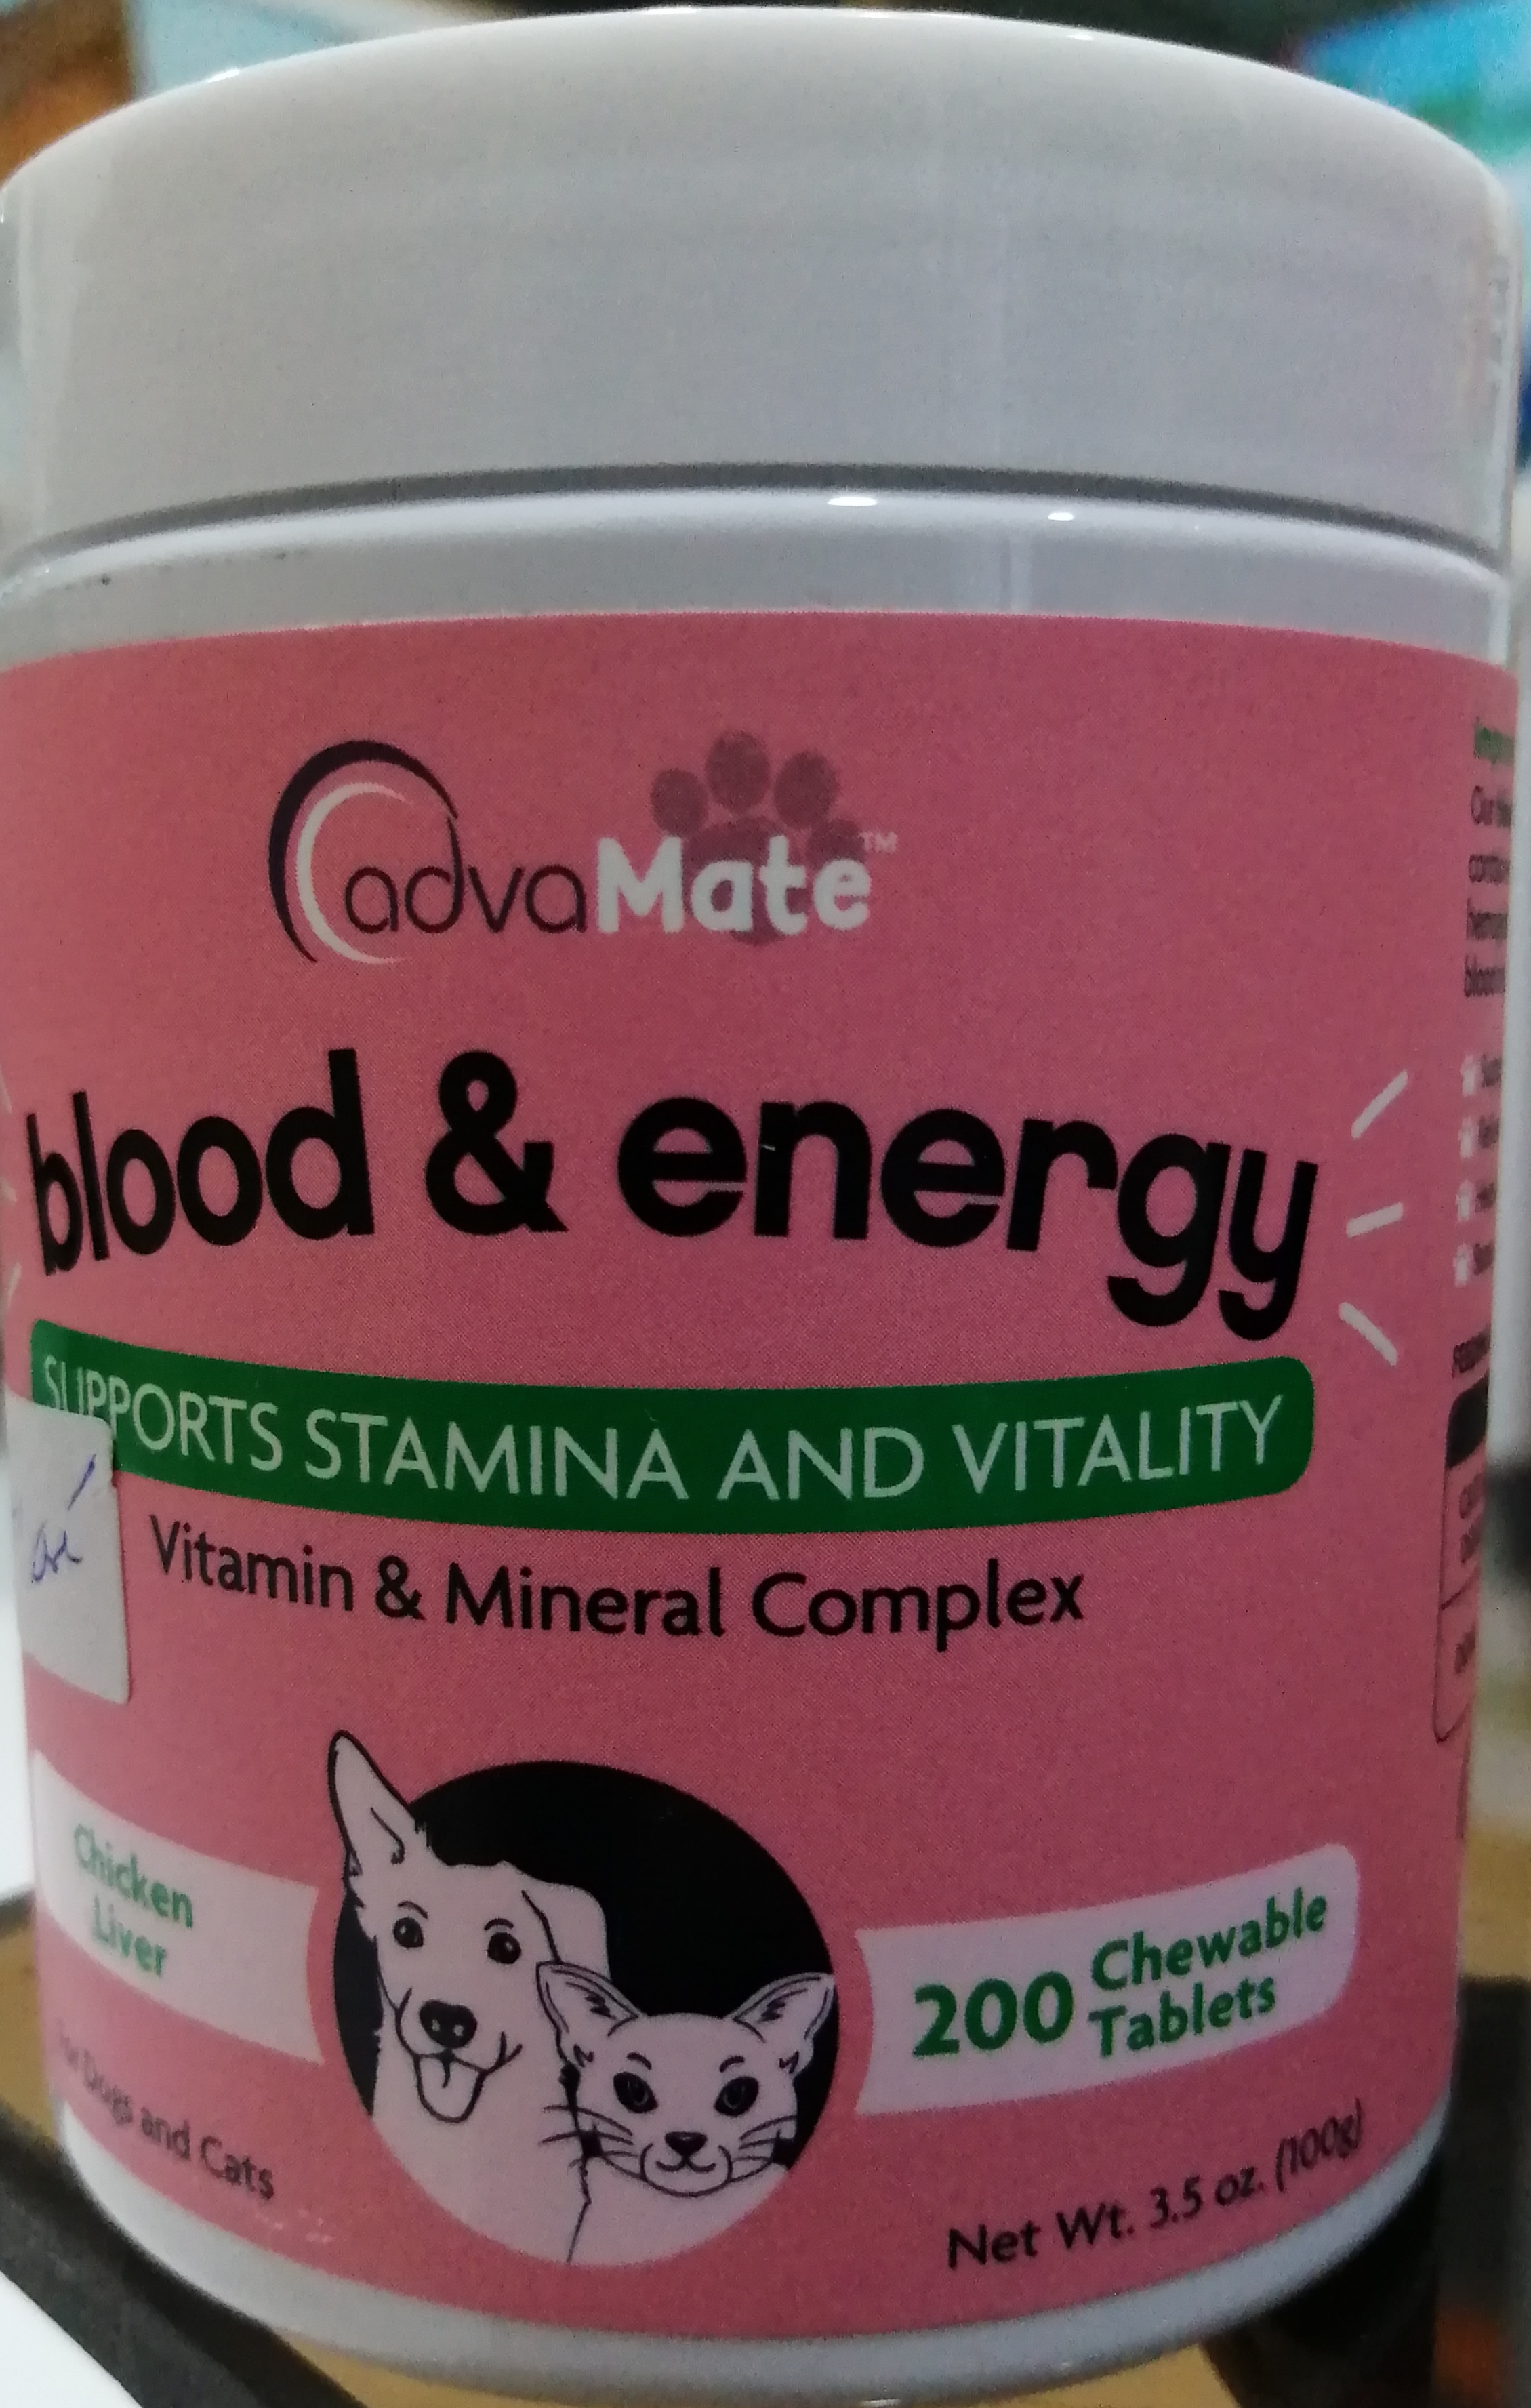 Blood and energy